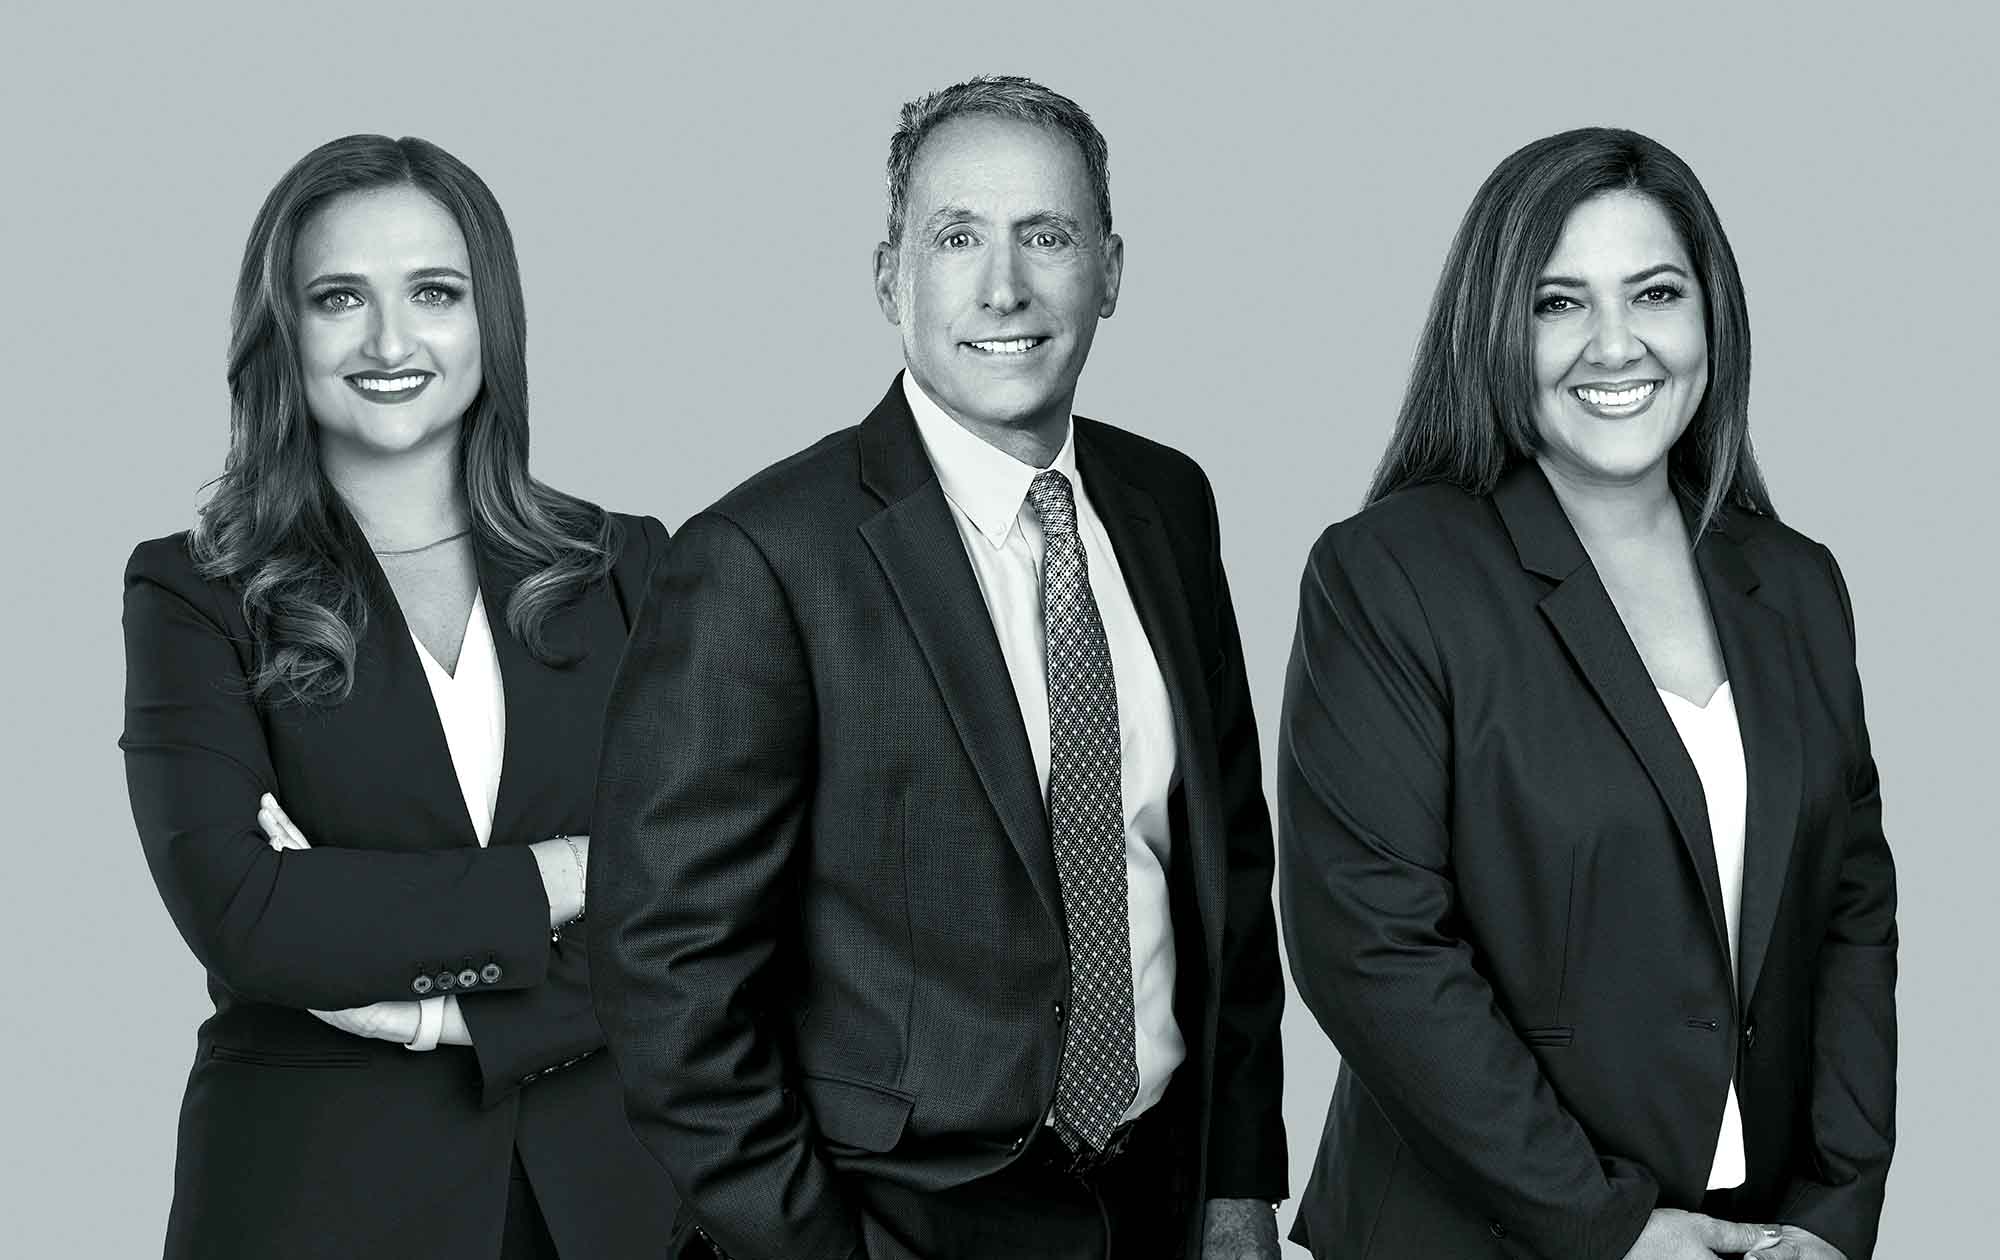 California dental license defense attorneys Robert K. Weinberg, Suzanne Crouts, and Melissa DuChene represent dentists, dental assistants, and dental hygienists with the Dental Board of California and Department of Consumer Affairs.